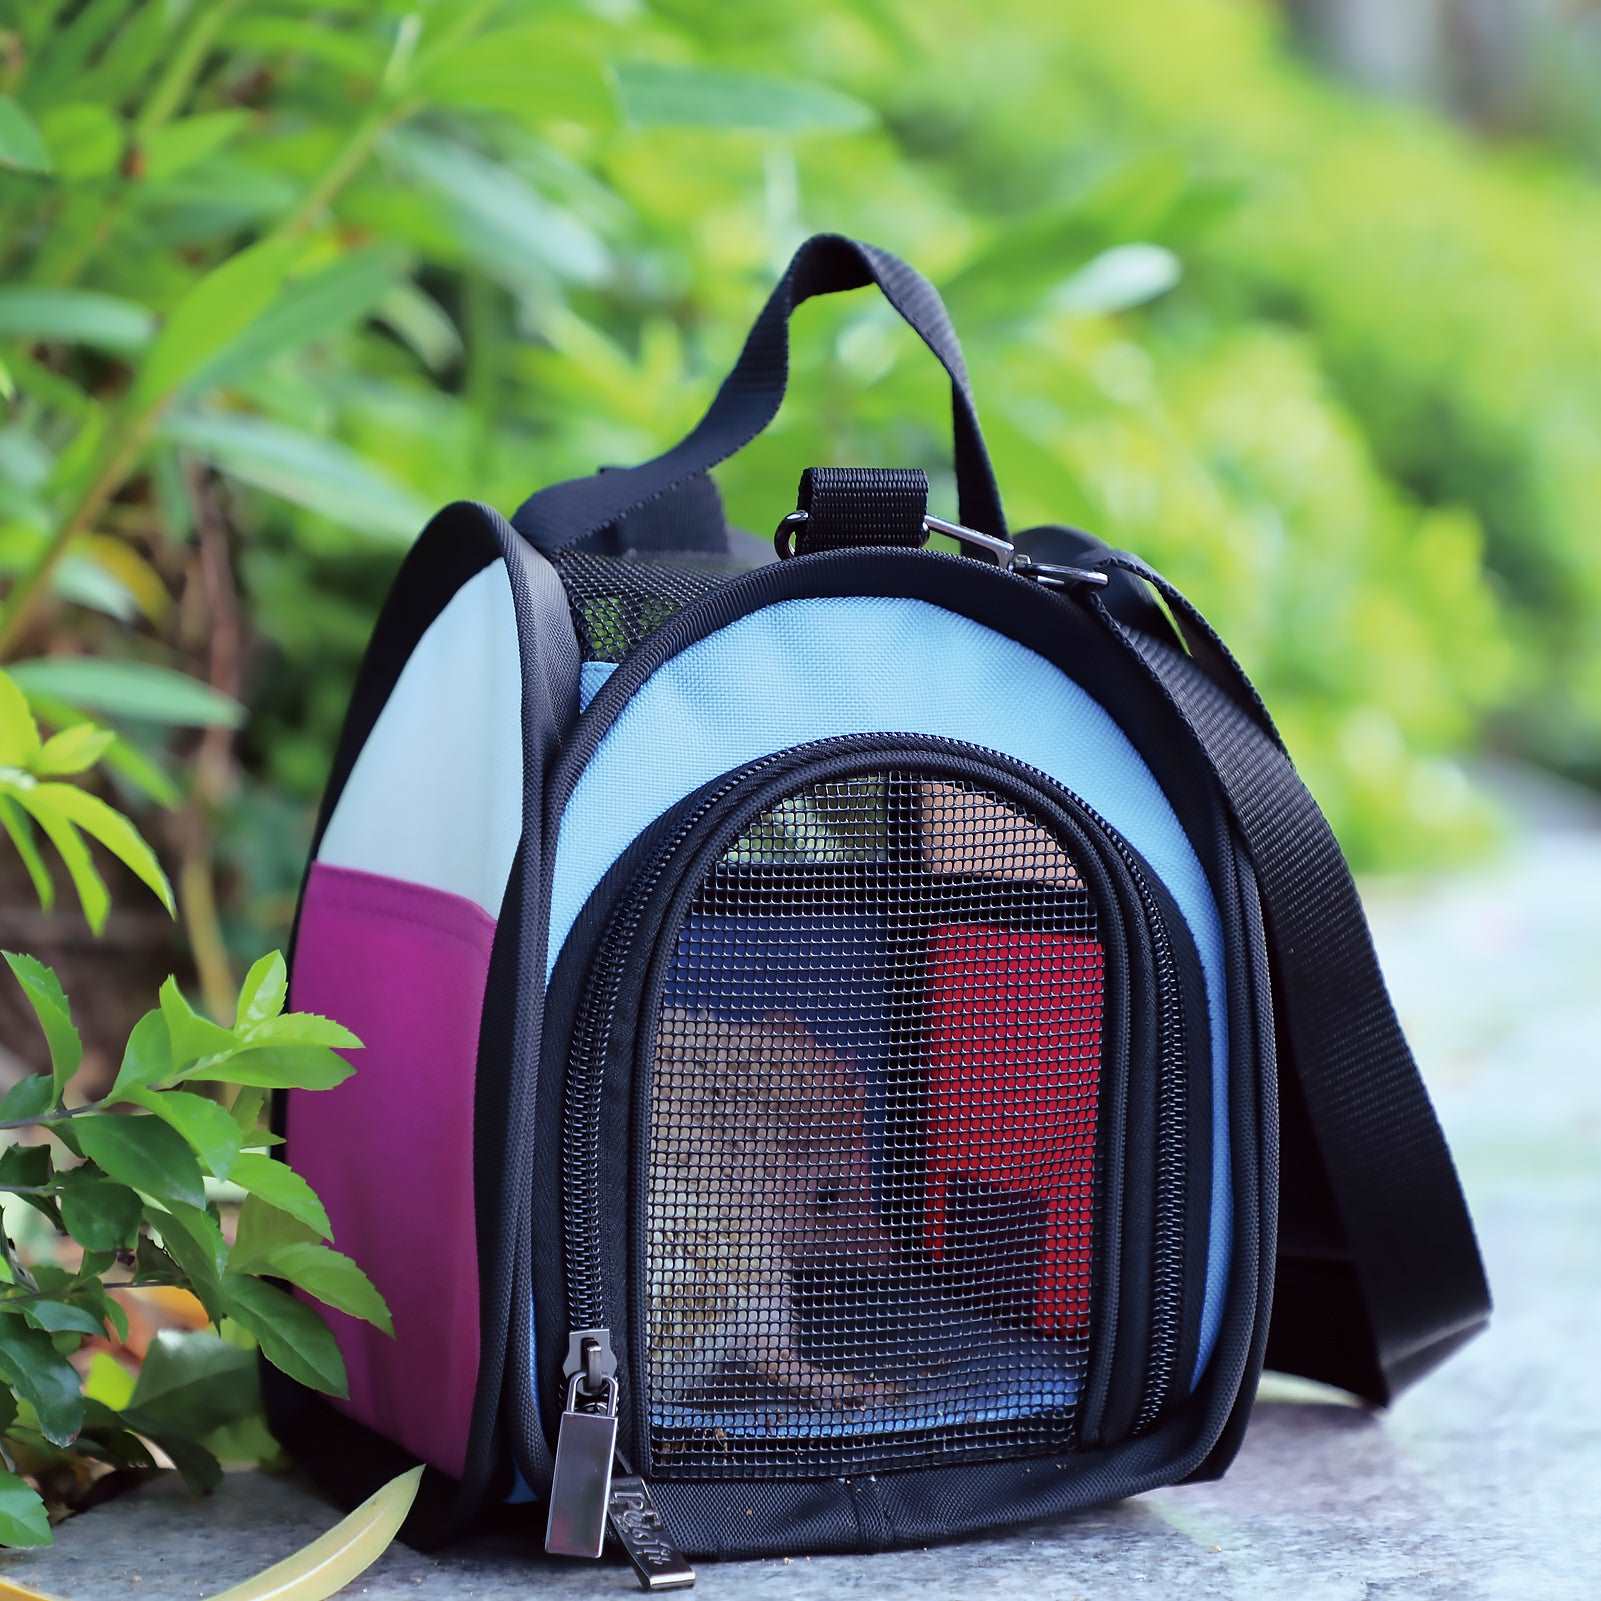 Petsfit-Hamster-Carrier-Small-Animal-Bag-Removable-Mat-03